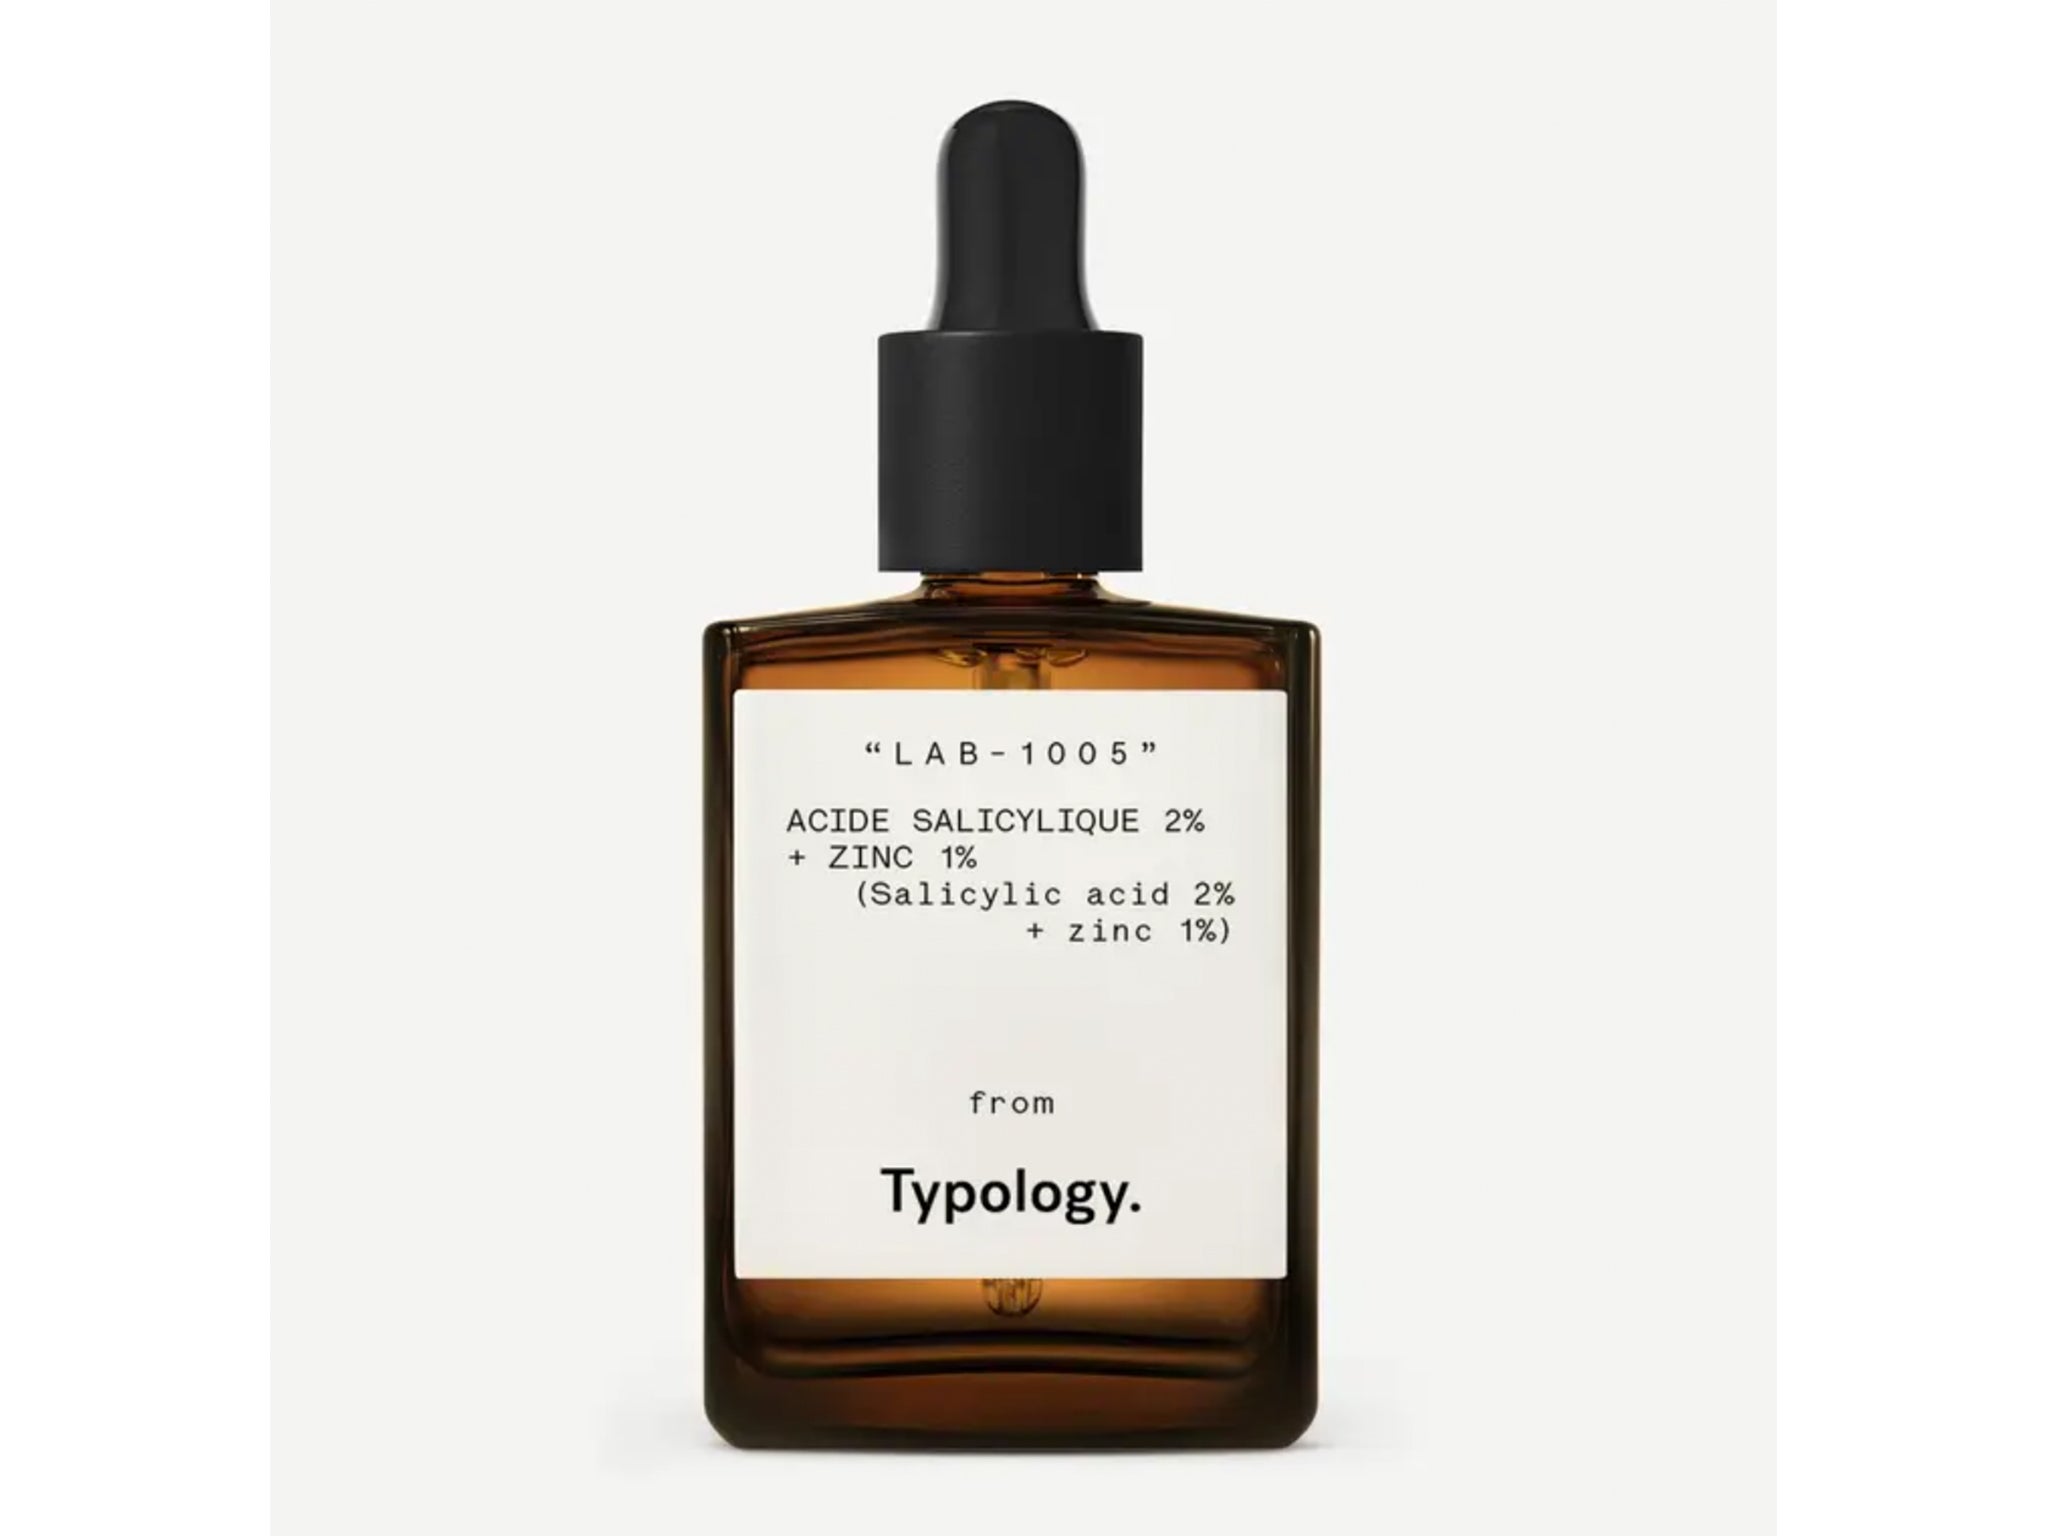 While suitable for all skin types, this salicylic acid serum will particularly benefit acne-prone complexions